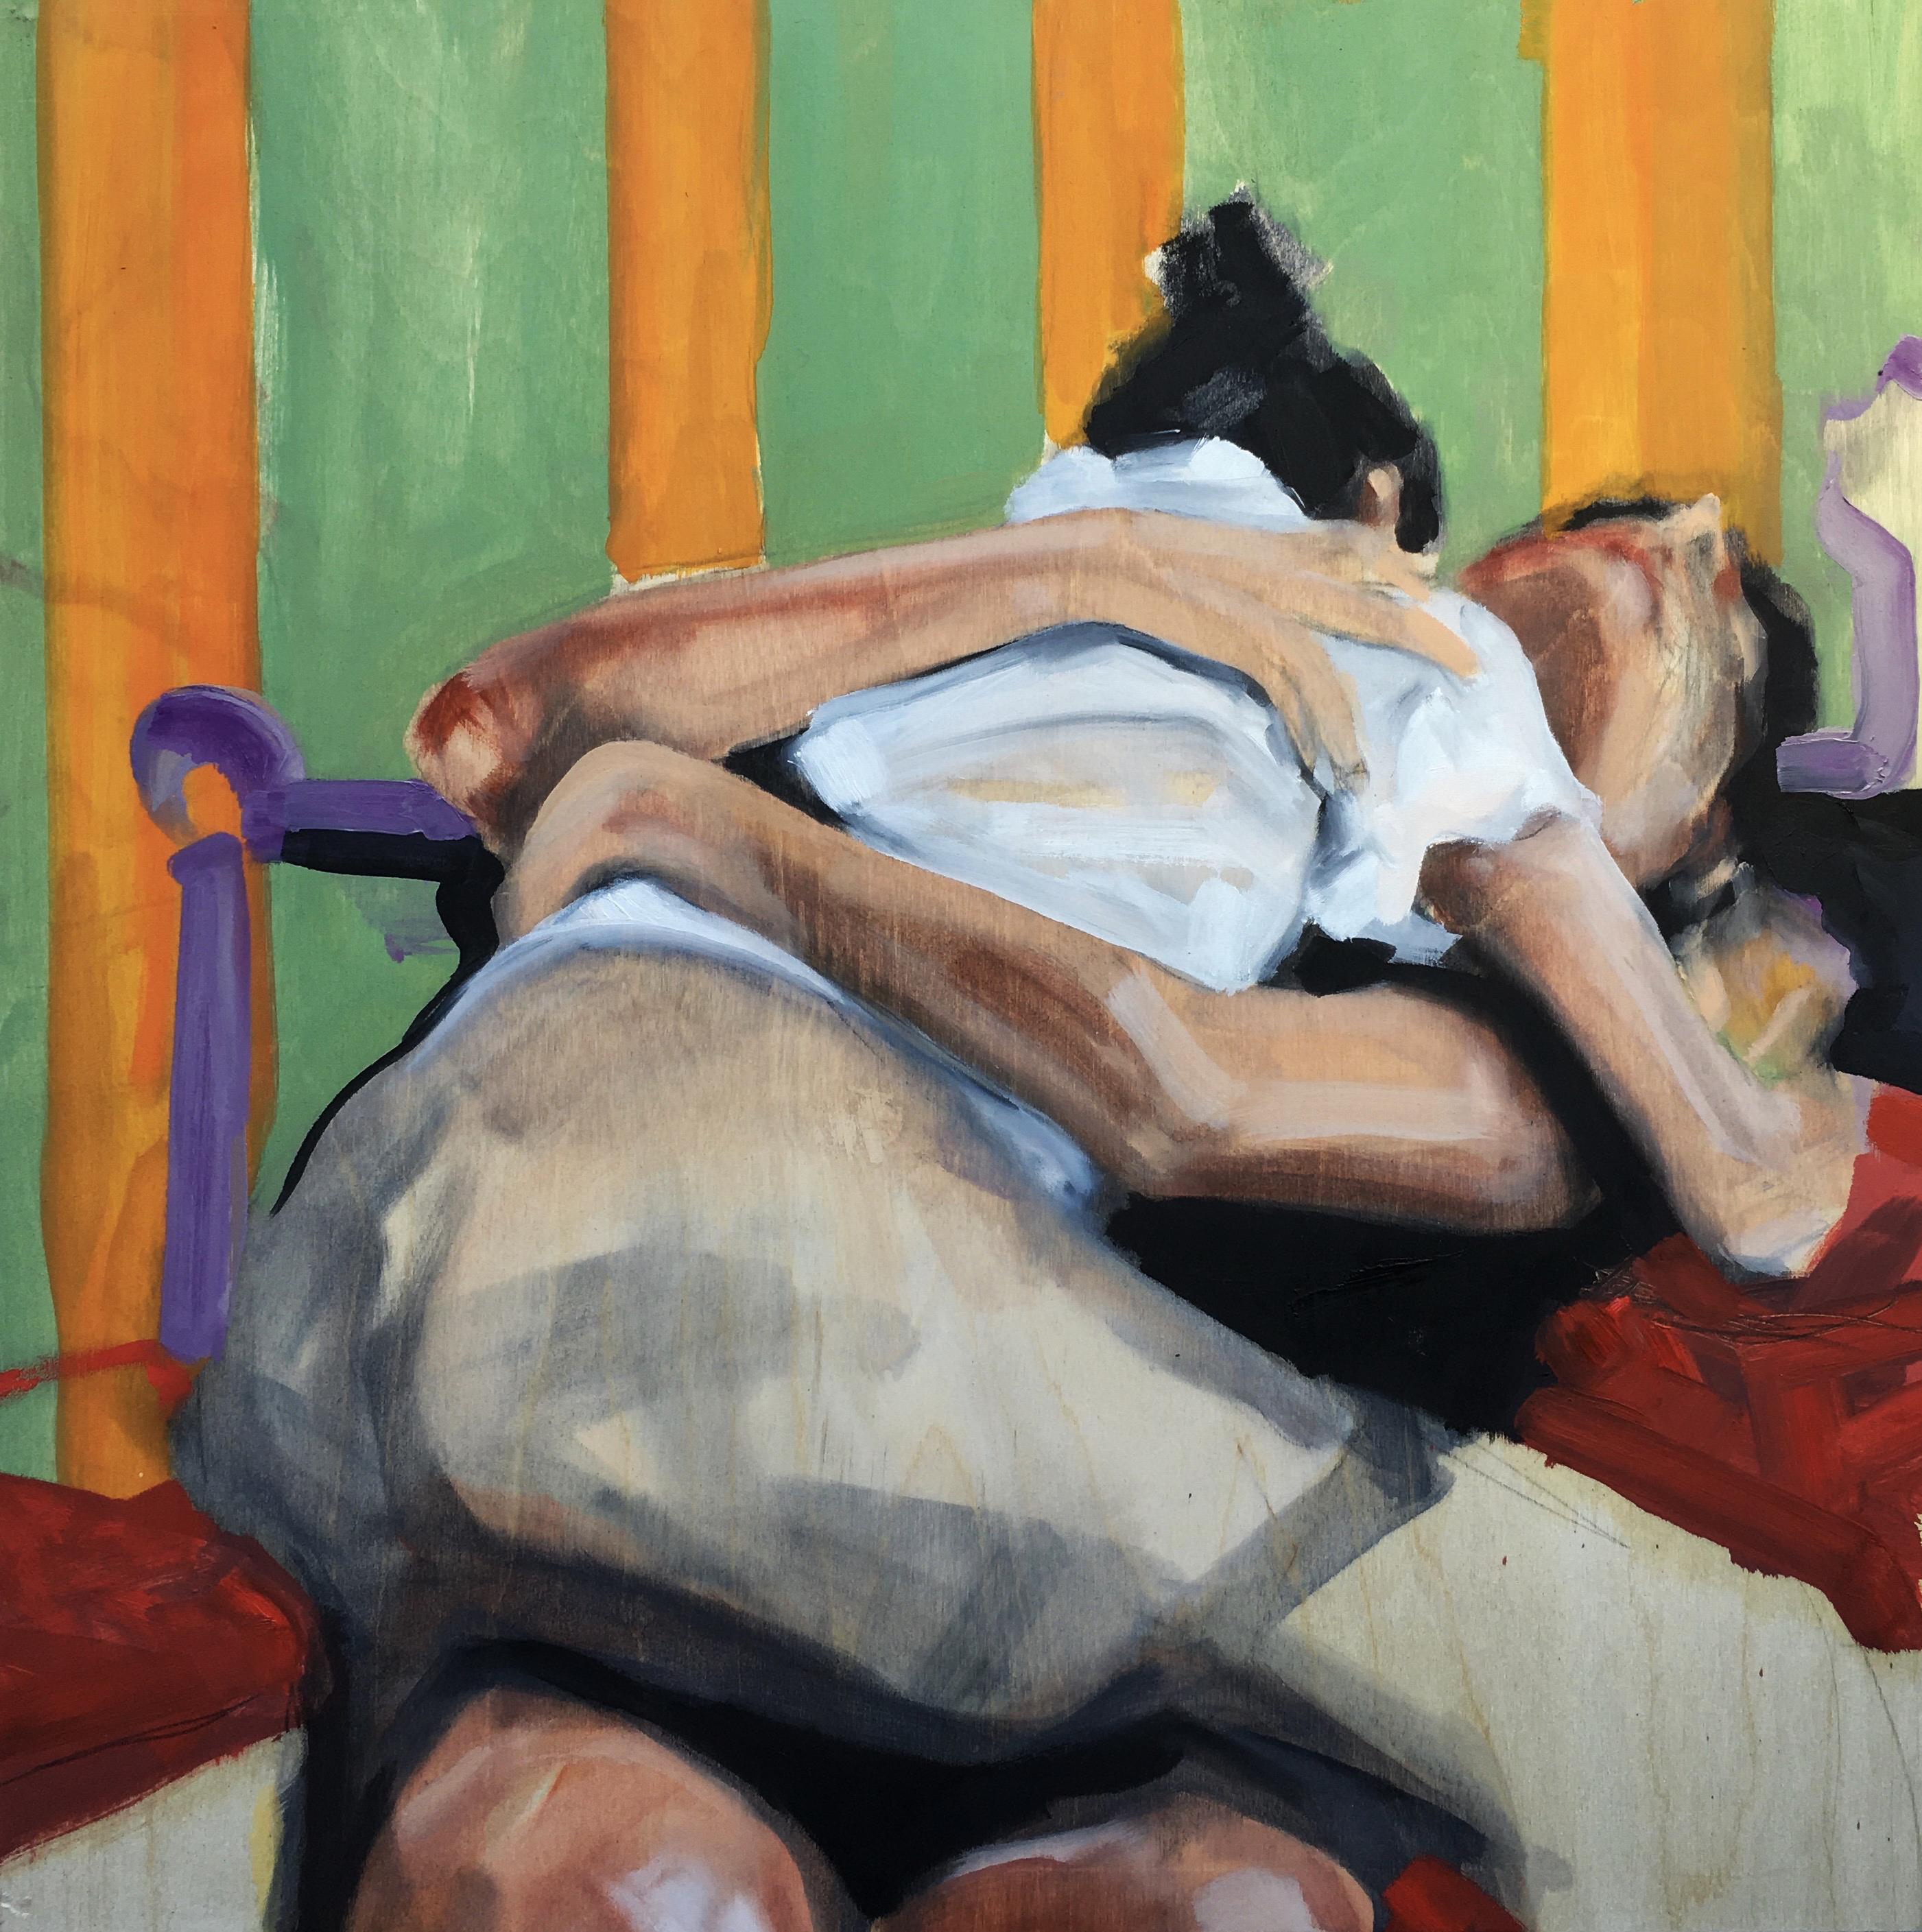 Will Hudson Portrait Painting - "The Clinch", oil painting, figurative, couple, embrace, intimacy, stripes, hug